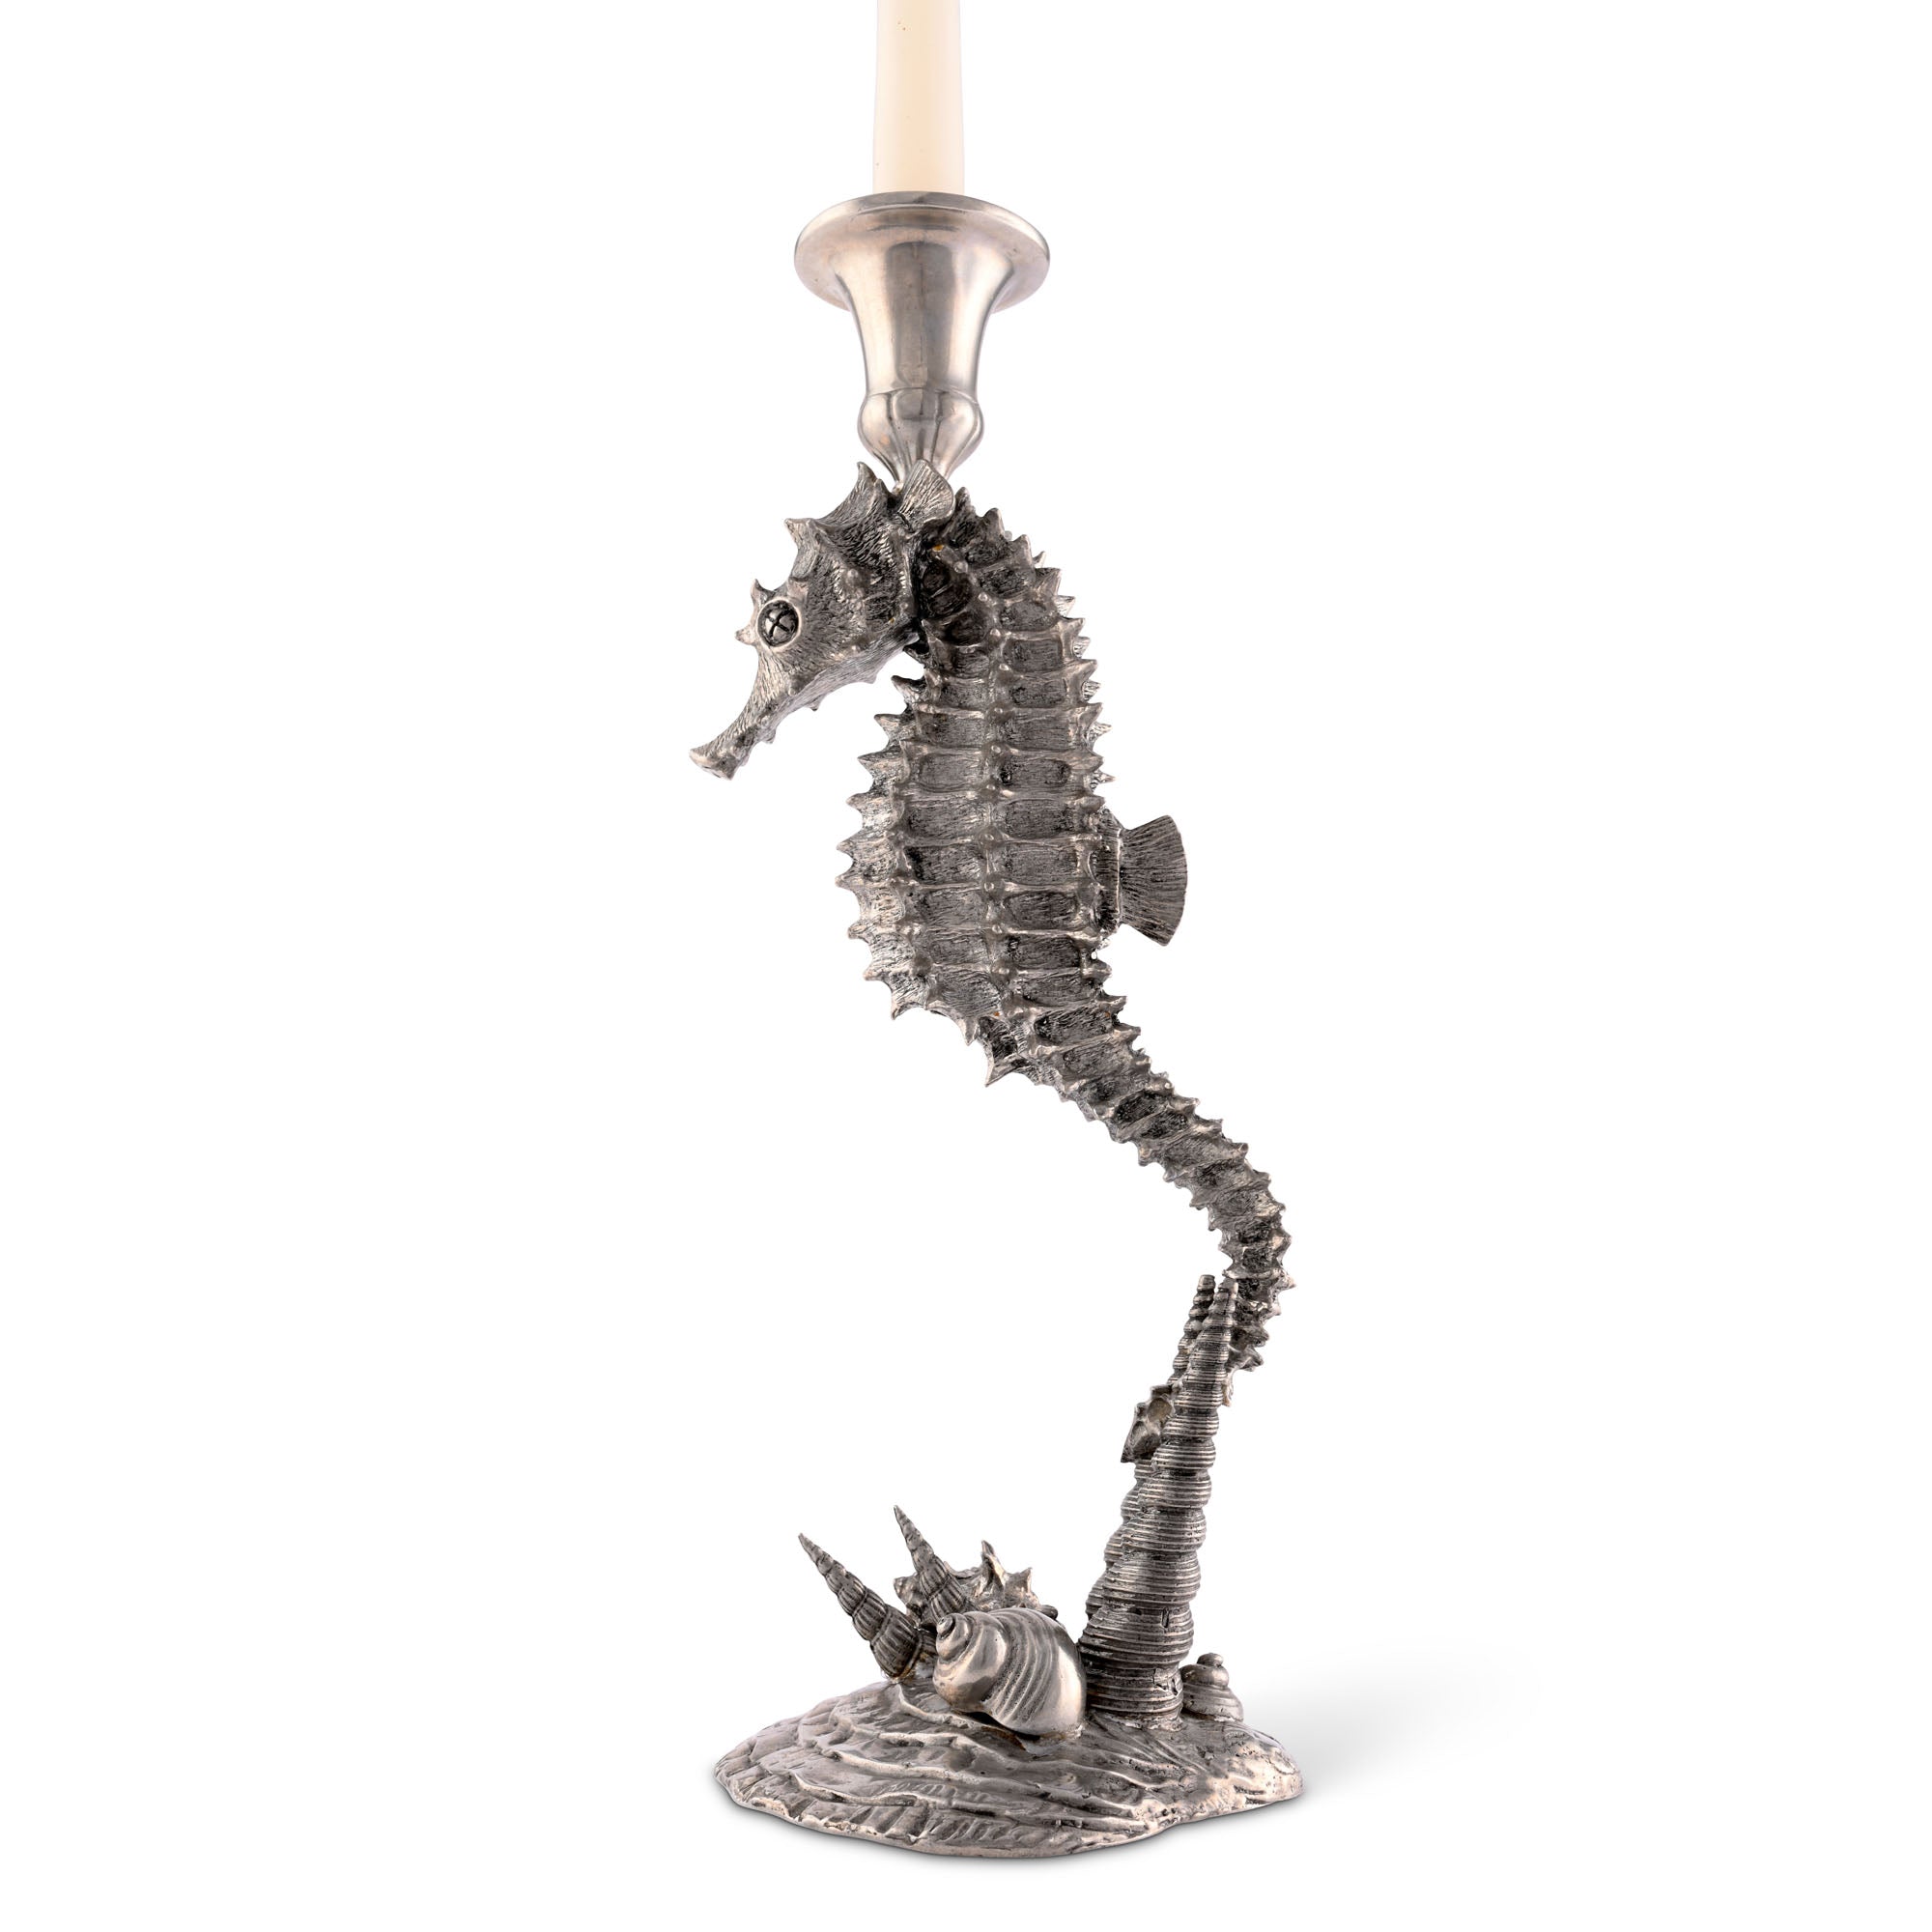 Vagabond House Pewter Seahorse Candlestick Product Image